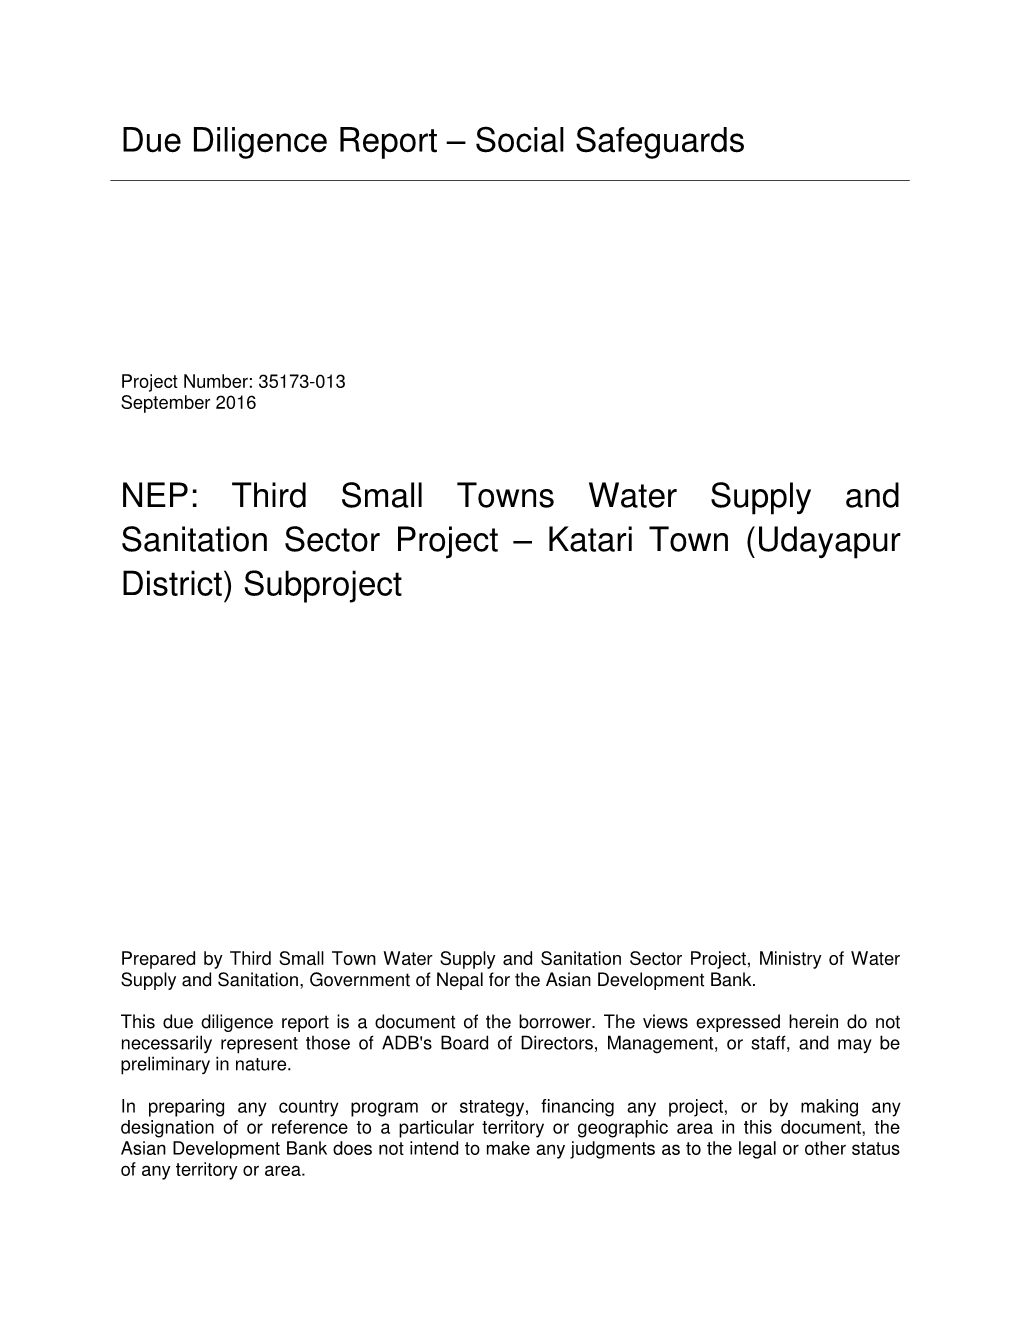 Third Small Towns Water Supply and Sanitation Sector Project – Katari Town (Udayapur District) Subproject